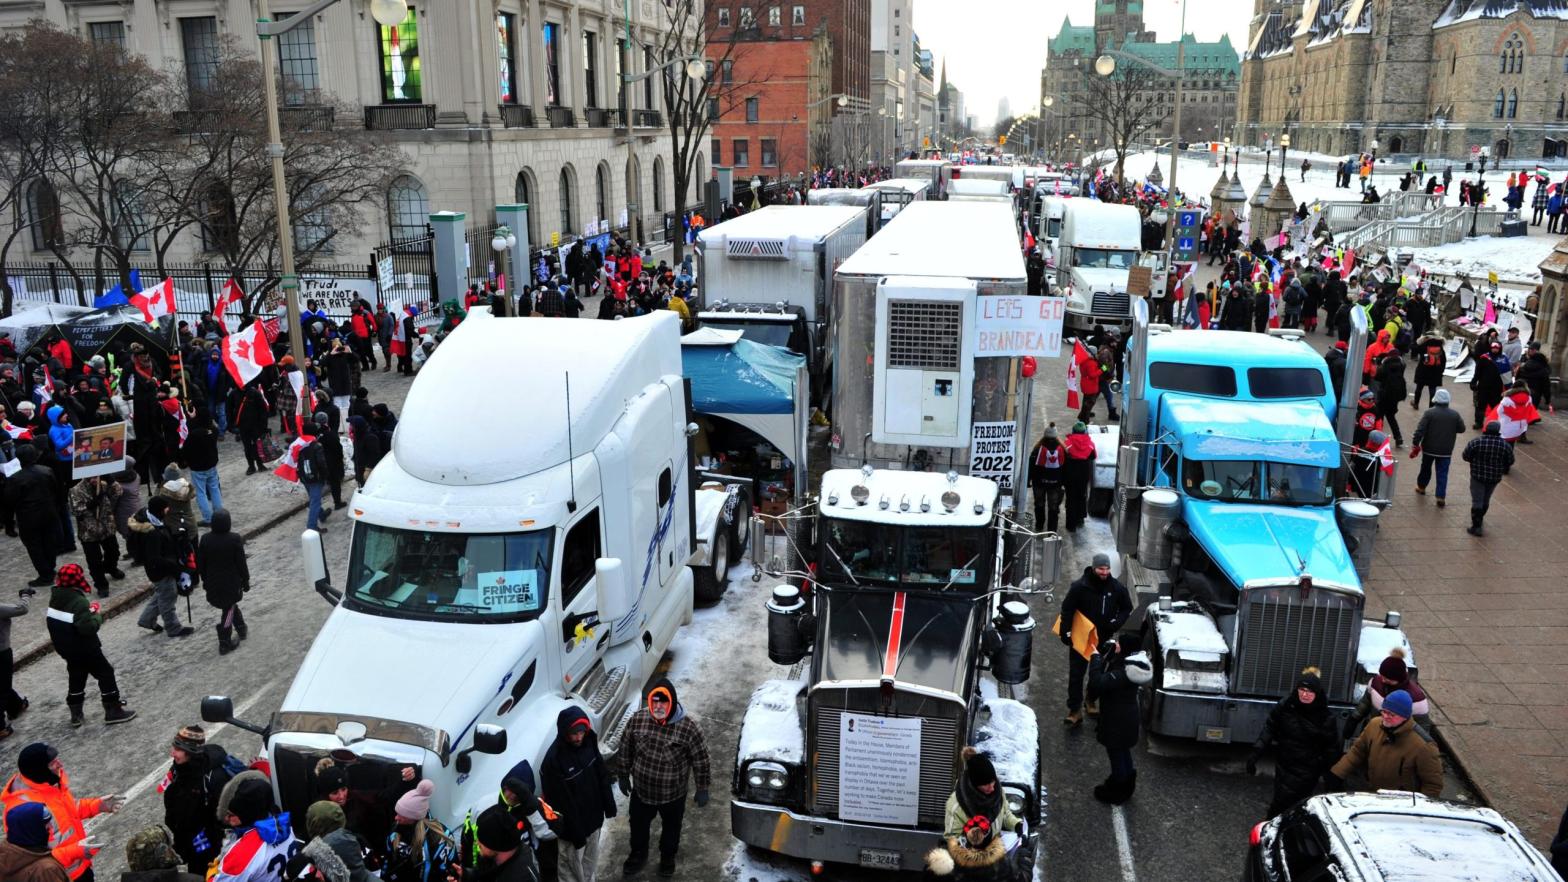 Supporters of the 'Freedom Convoy' block streets near Parliament Hill in Ottawa, Canada, on Feb. 12, 2022. (Photo: Mohamed Kadri / NurPhoto via Getty Images, Getty Images)